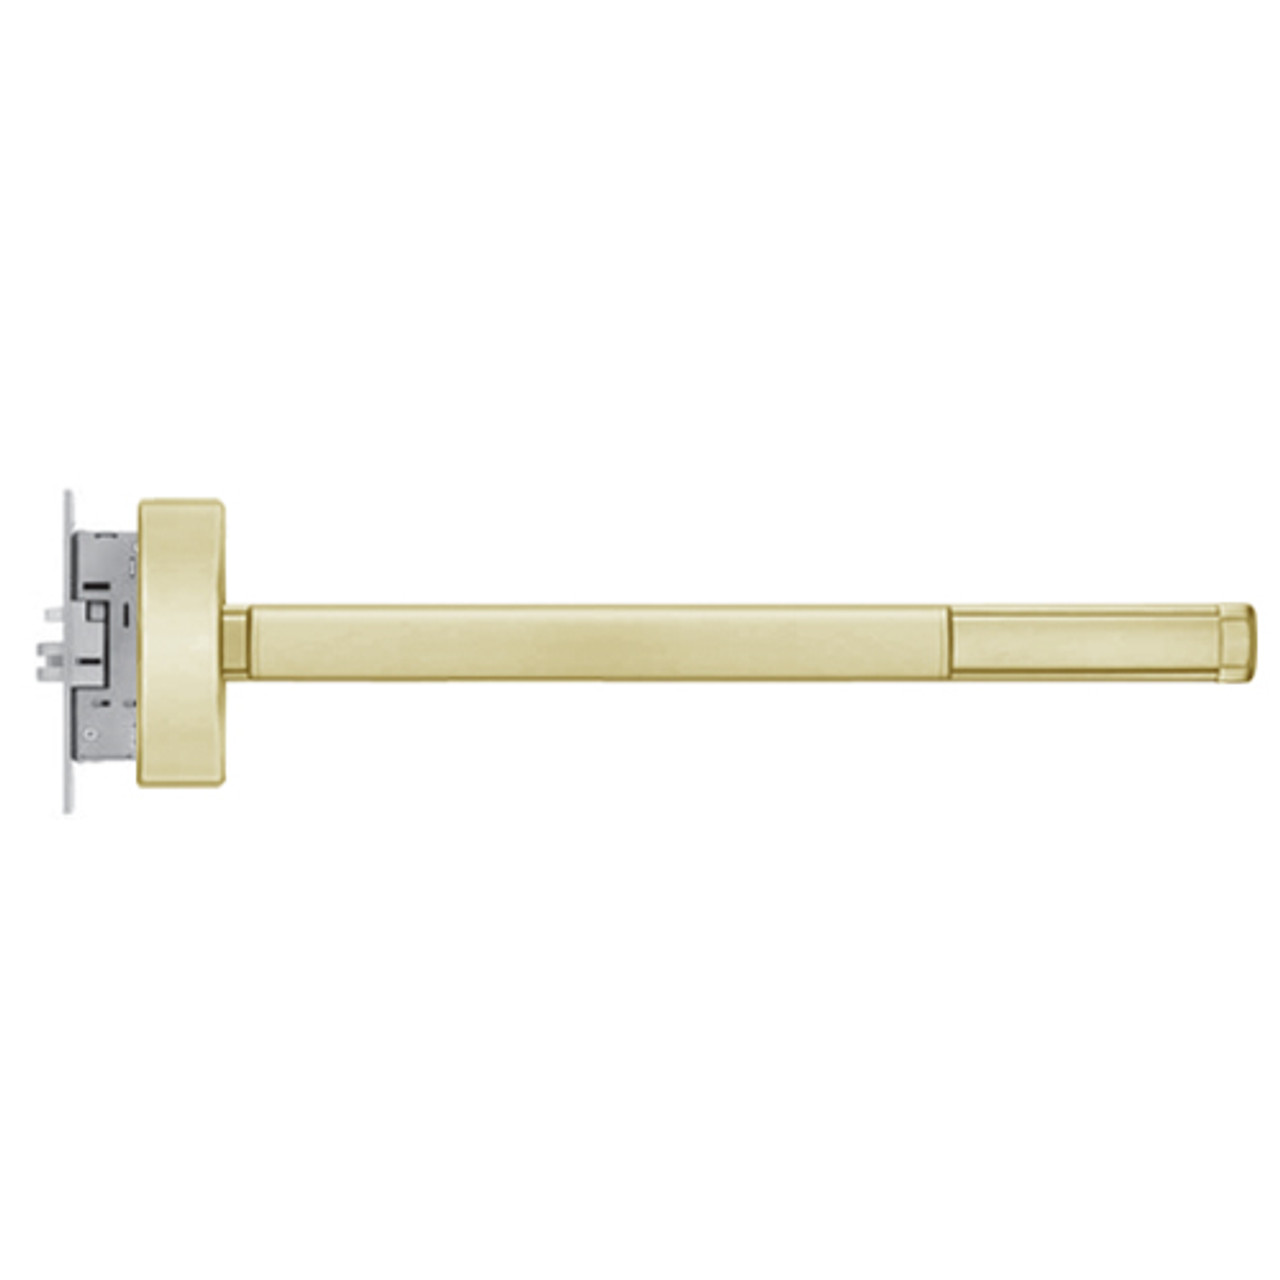 ELR2308-RHR-606-36 PHI 2300 Series Apex Mortise Exit Device with Electric Latch Retraction Prepped for Key Controls Lever/Knob in Satin Brass Finish